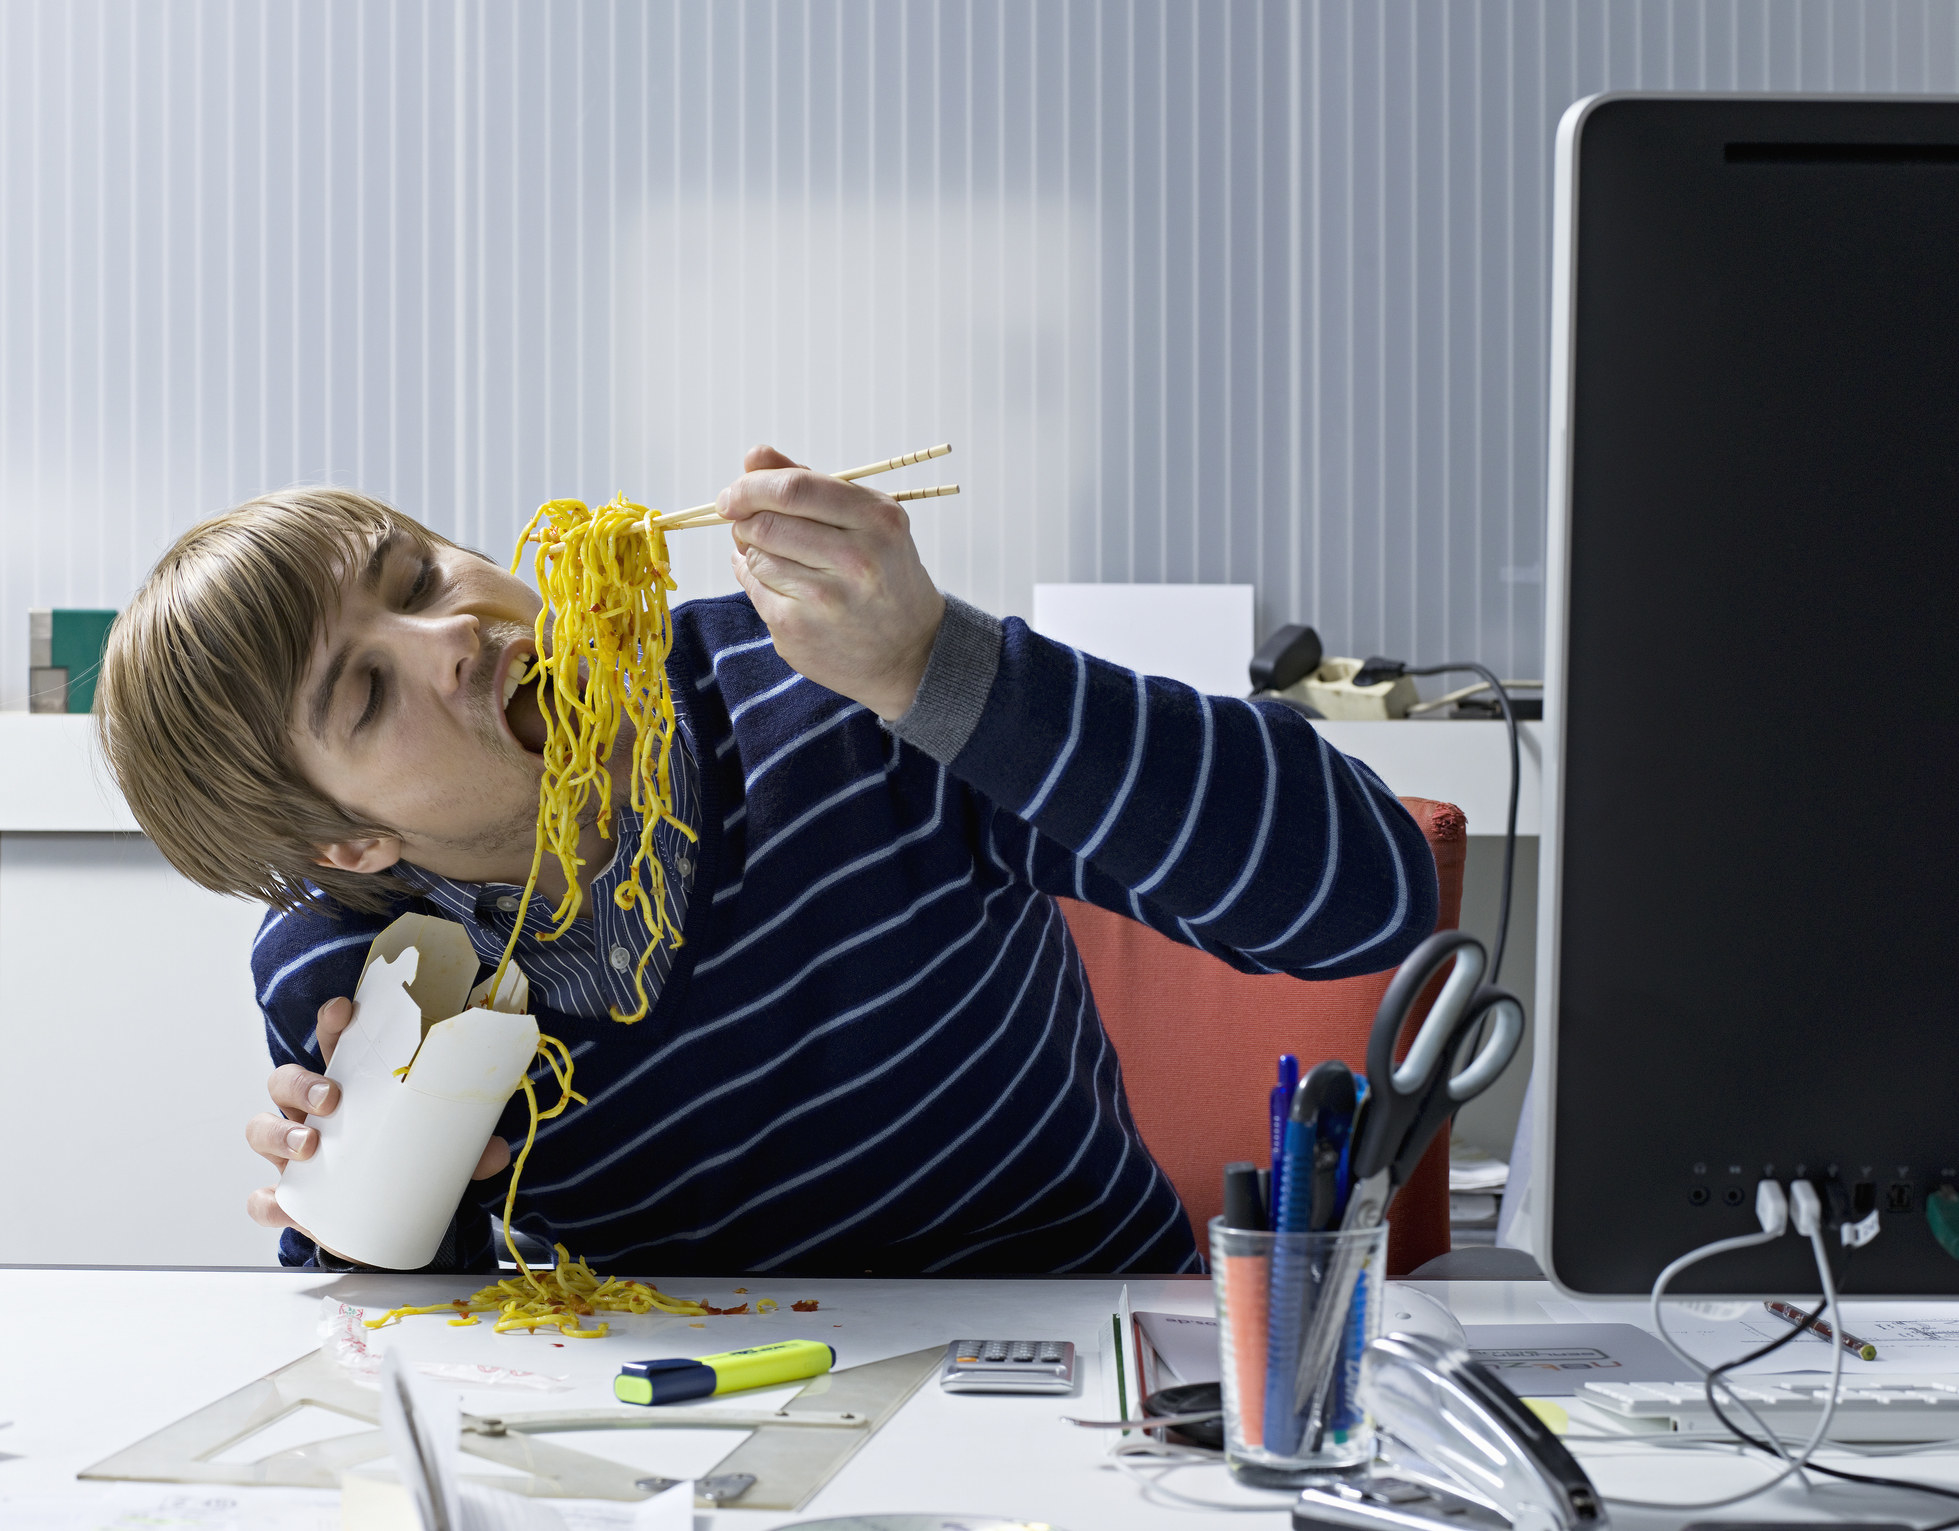 A person sitting at their work desk stuffing their face with take-out noodles